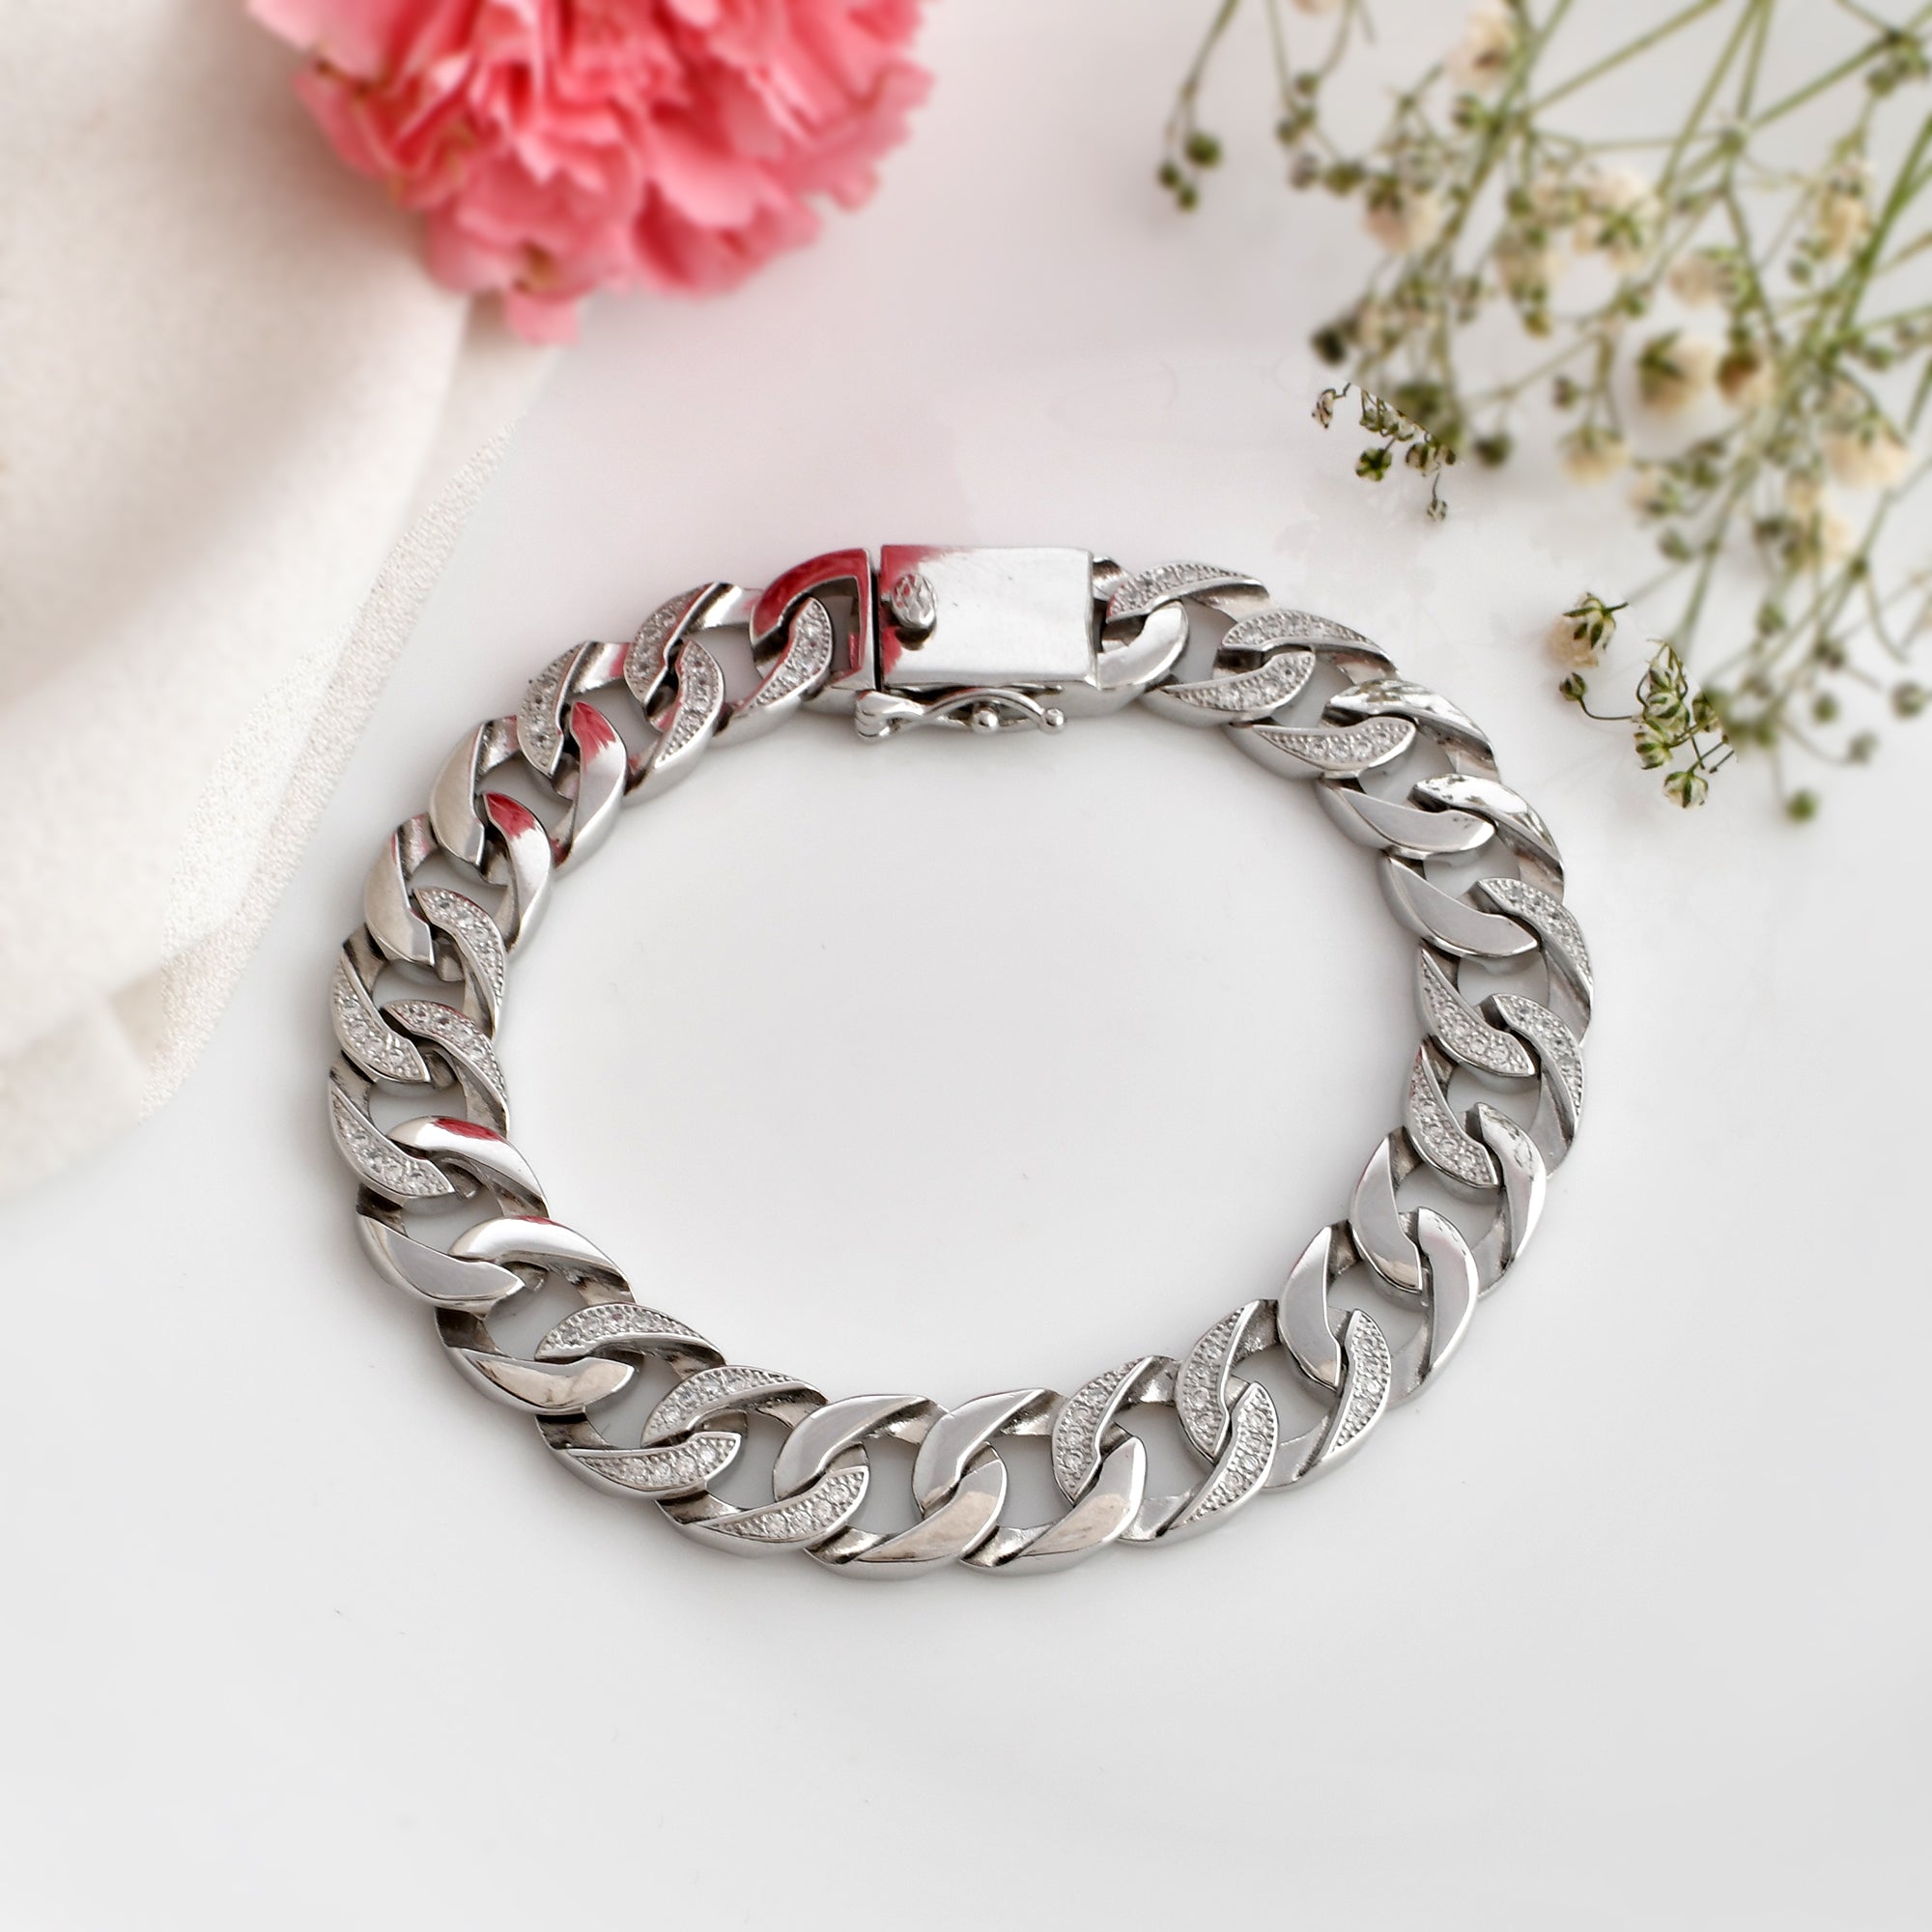 Buy Beautiful Silver Bangles Online - Find Your Perfect Style